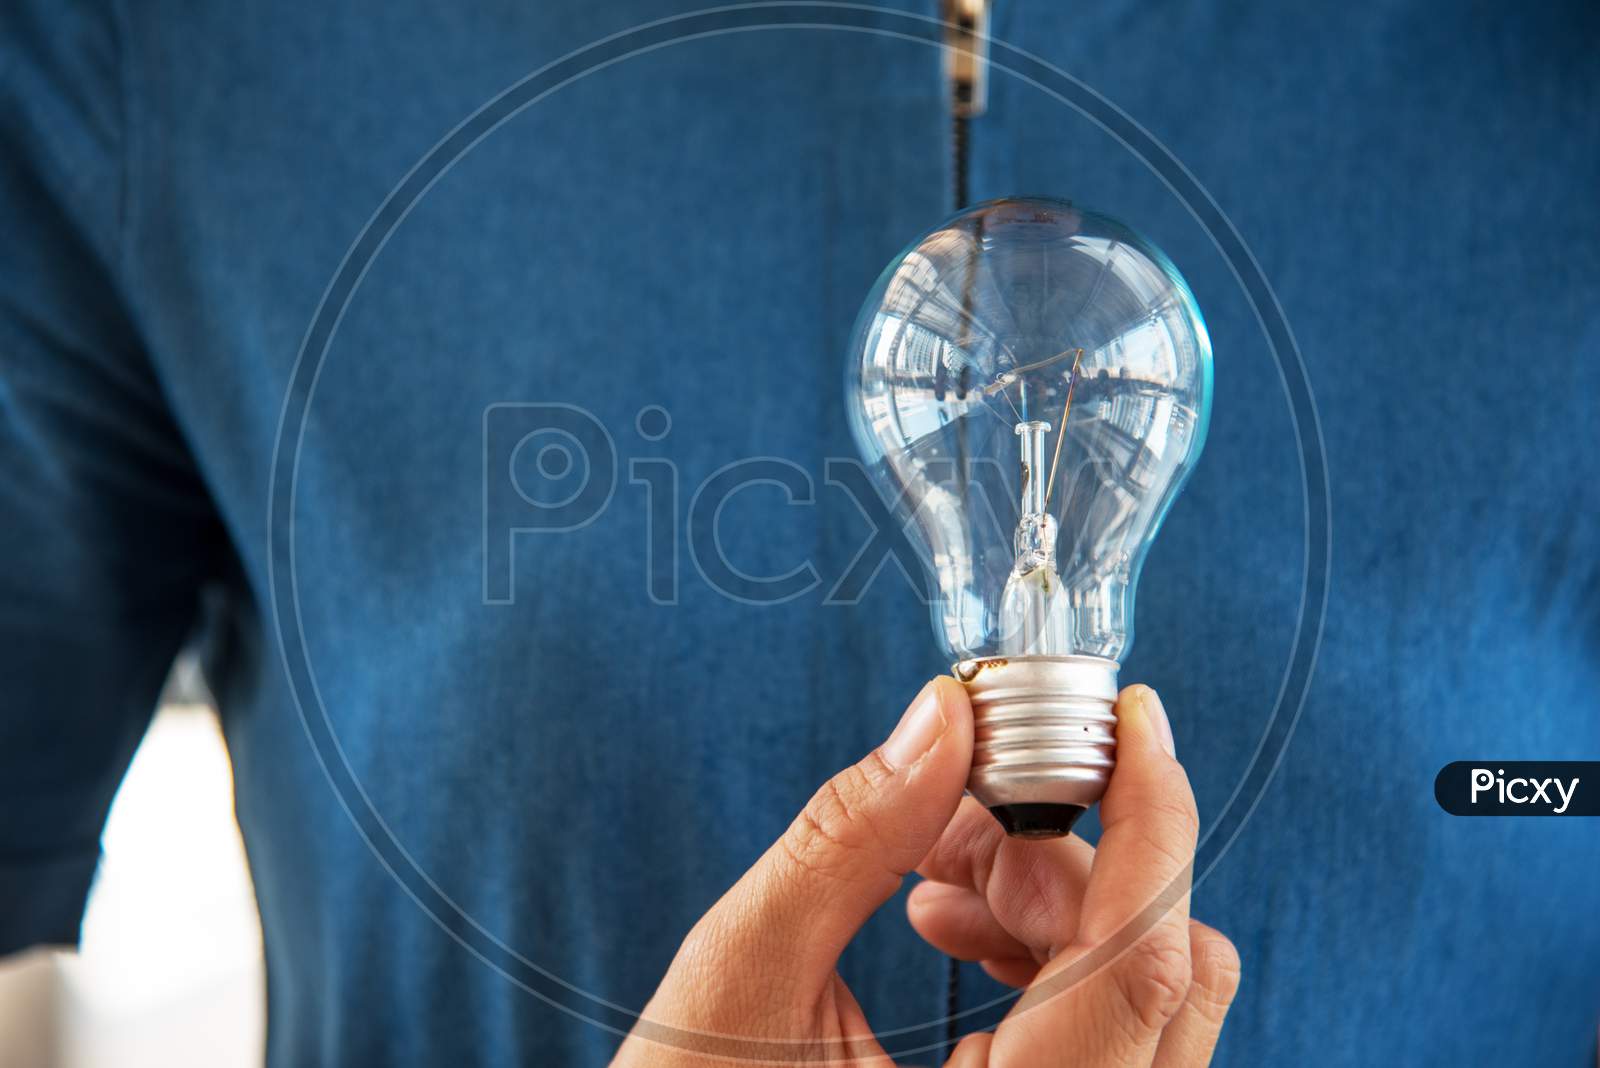 Light Bulb In Woman Hand. Idea And Creative Concept. Success And Thinking Concept. Object And People Theme.